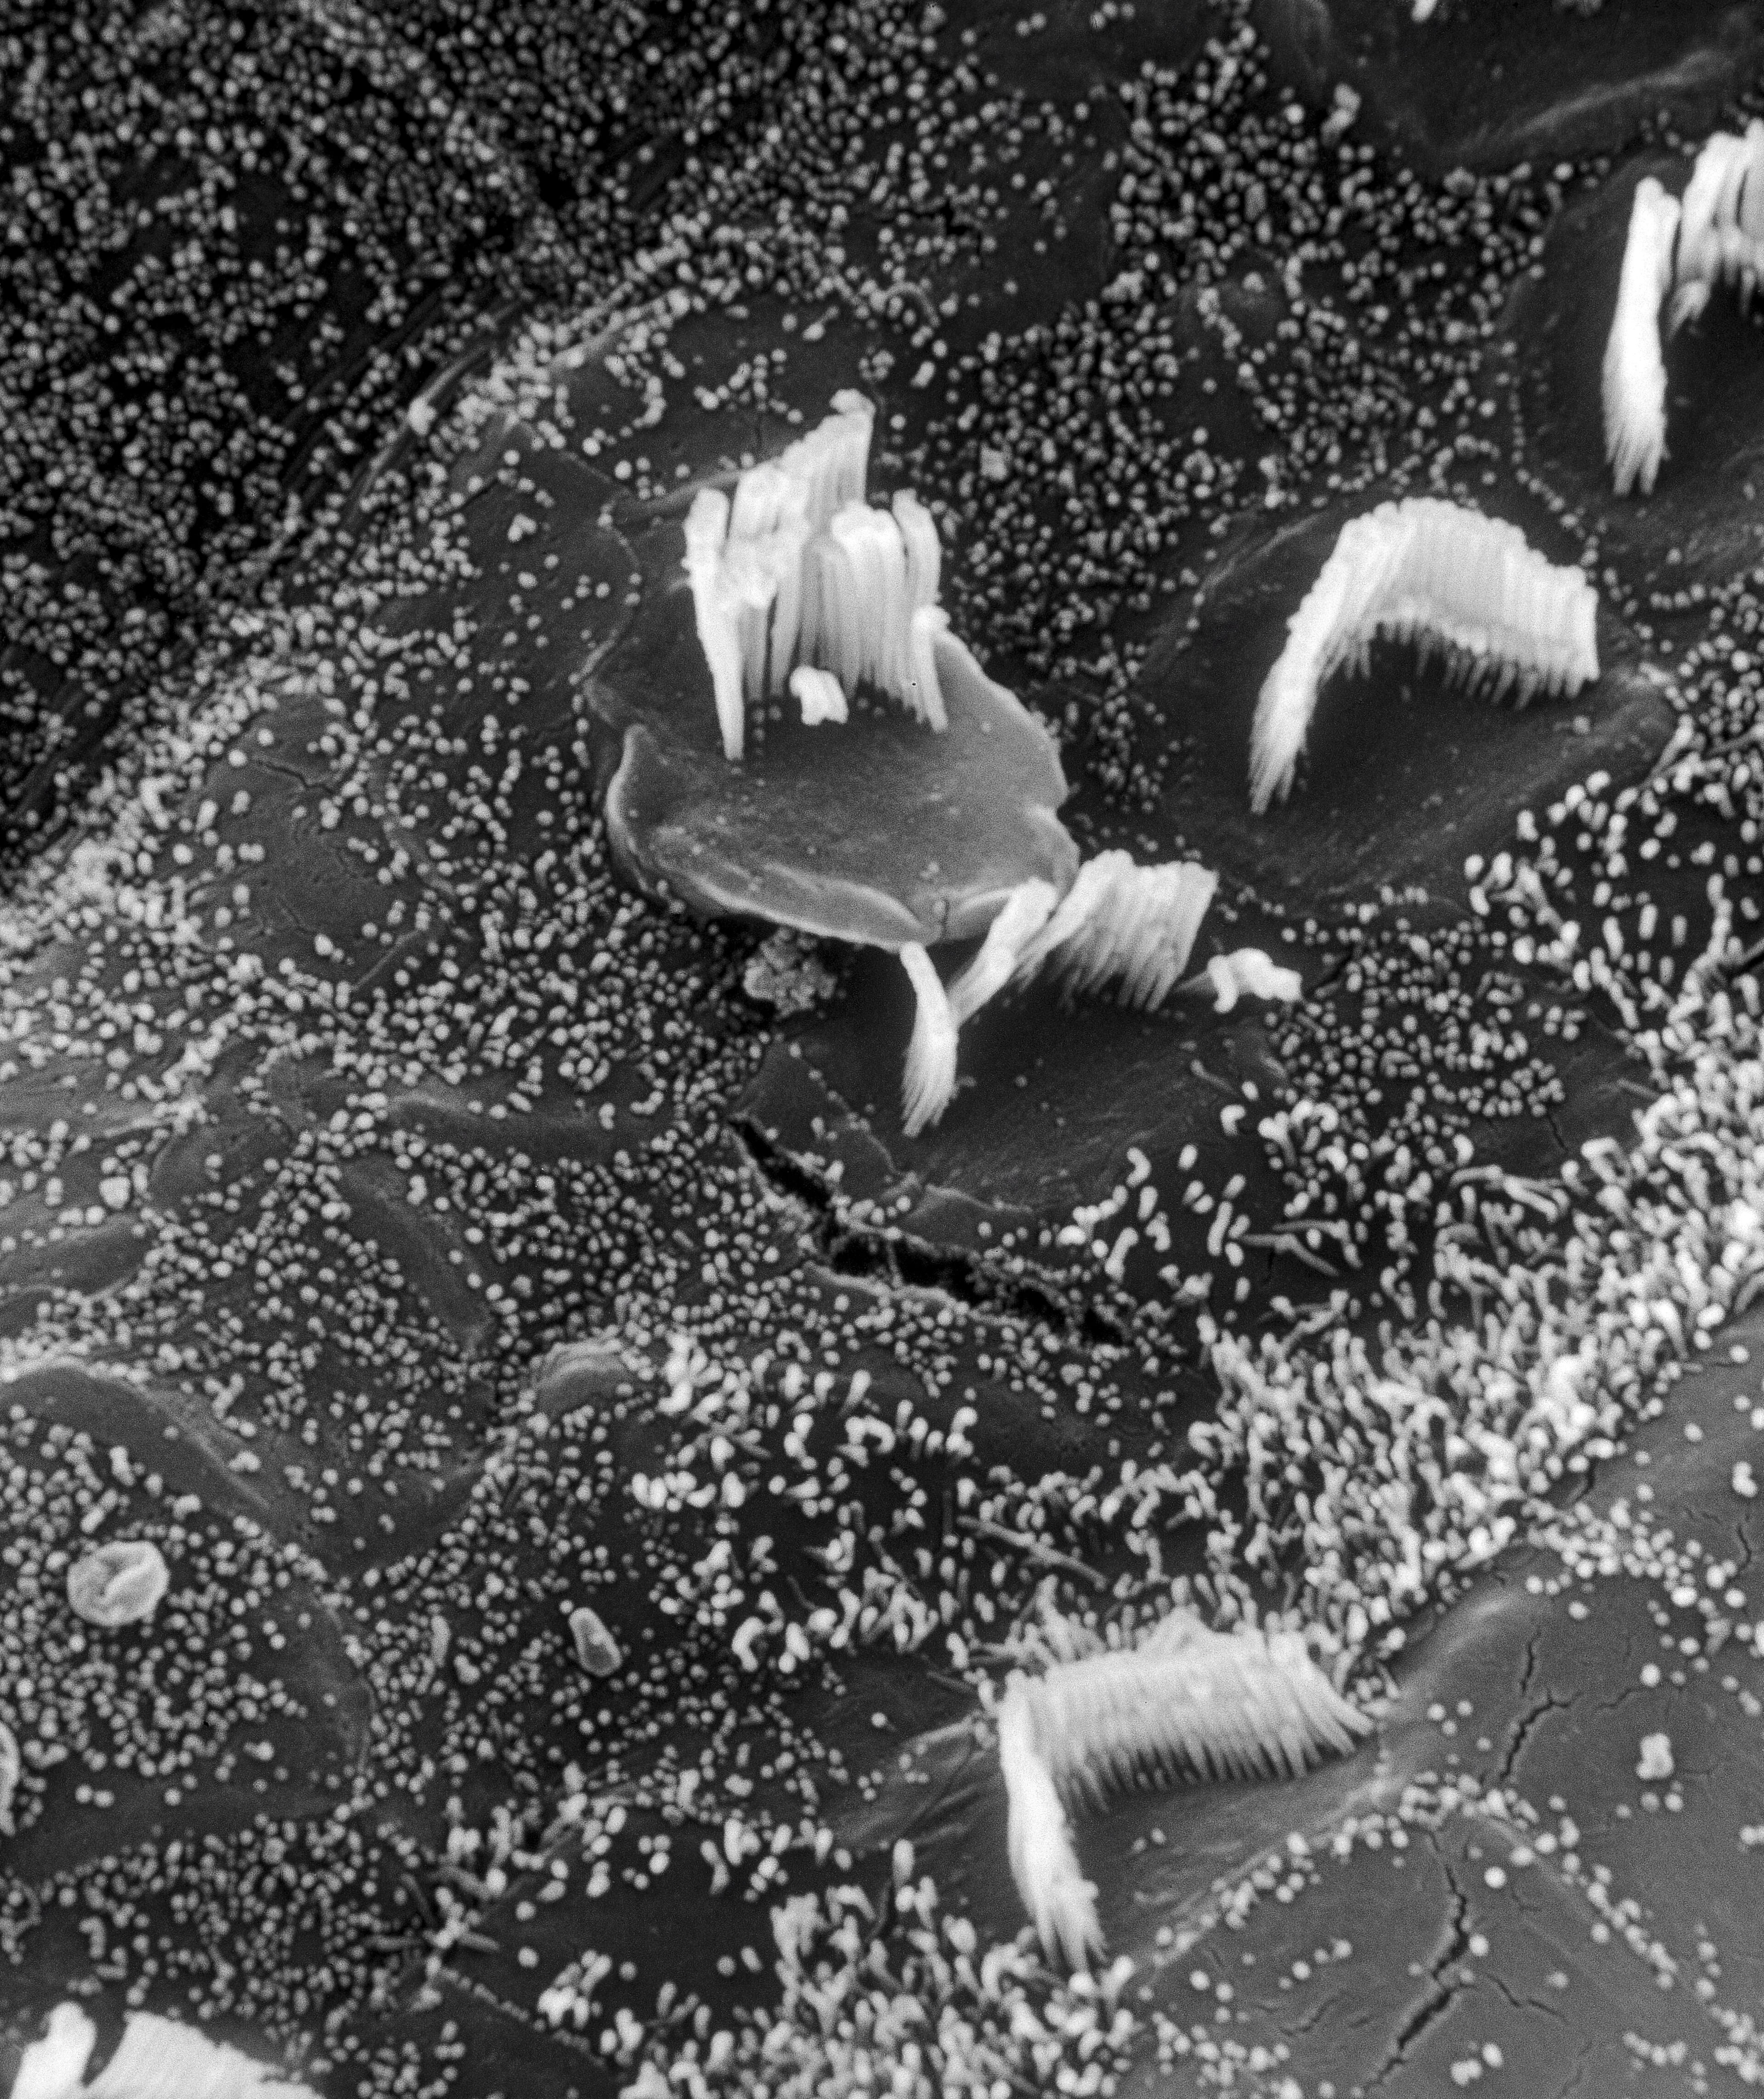 Hair cells in the cochlea damaged by old age